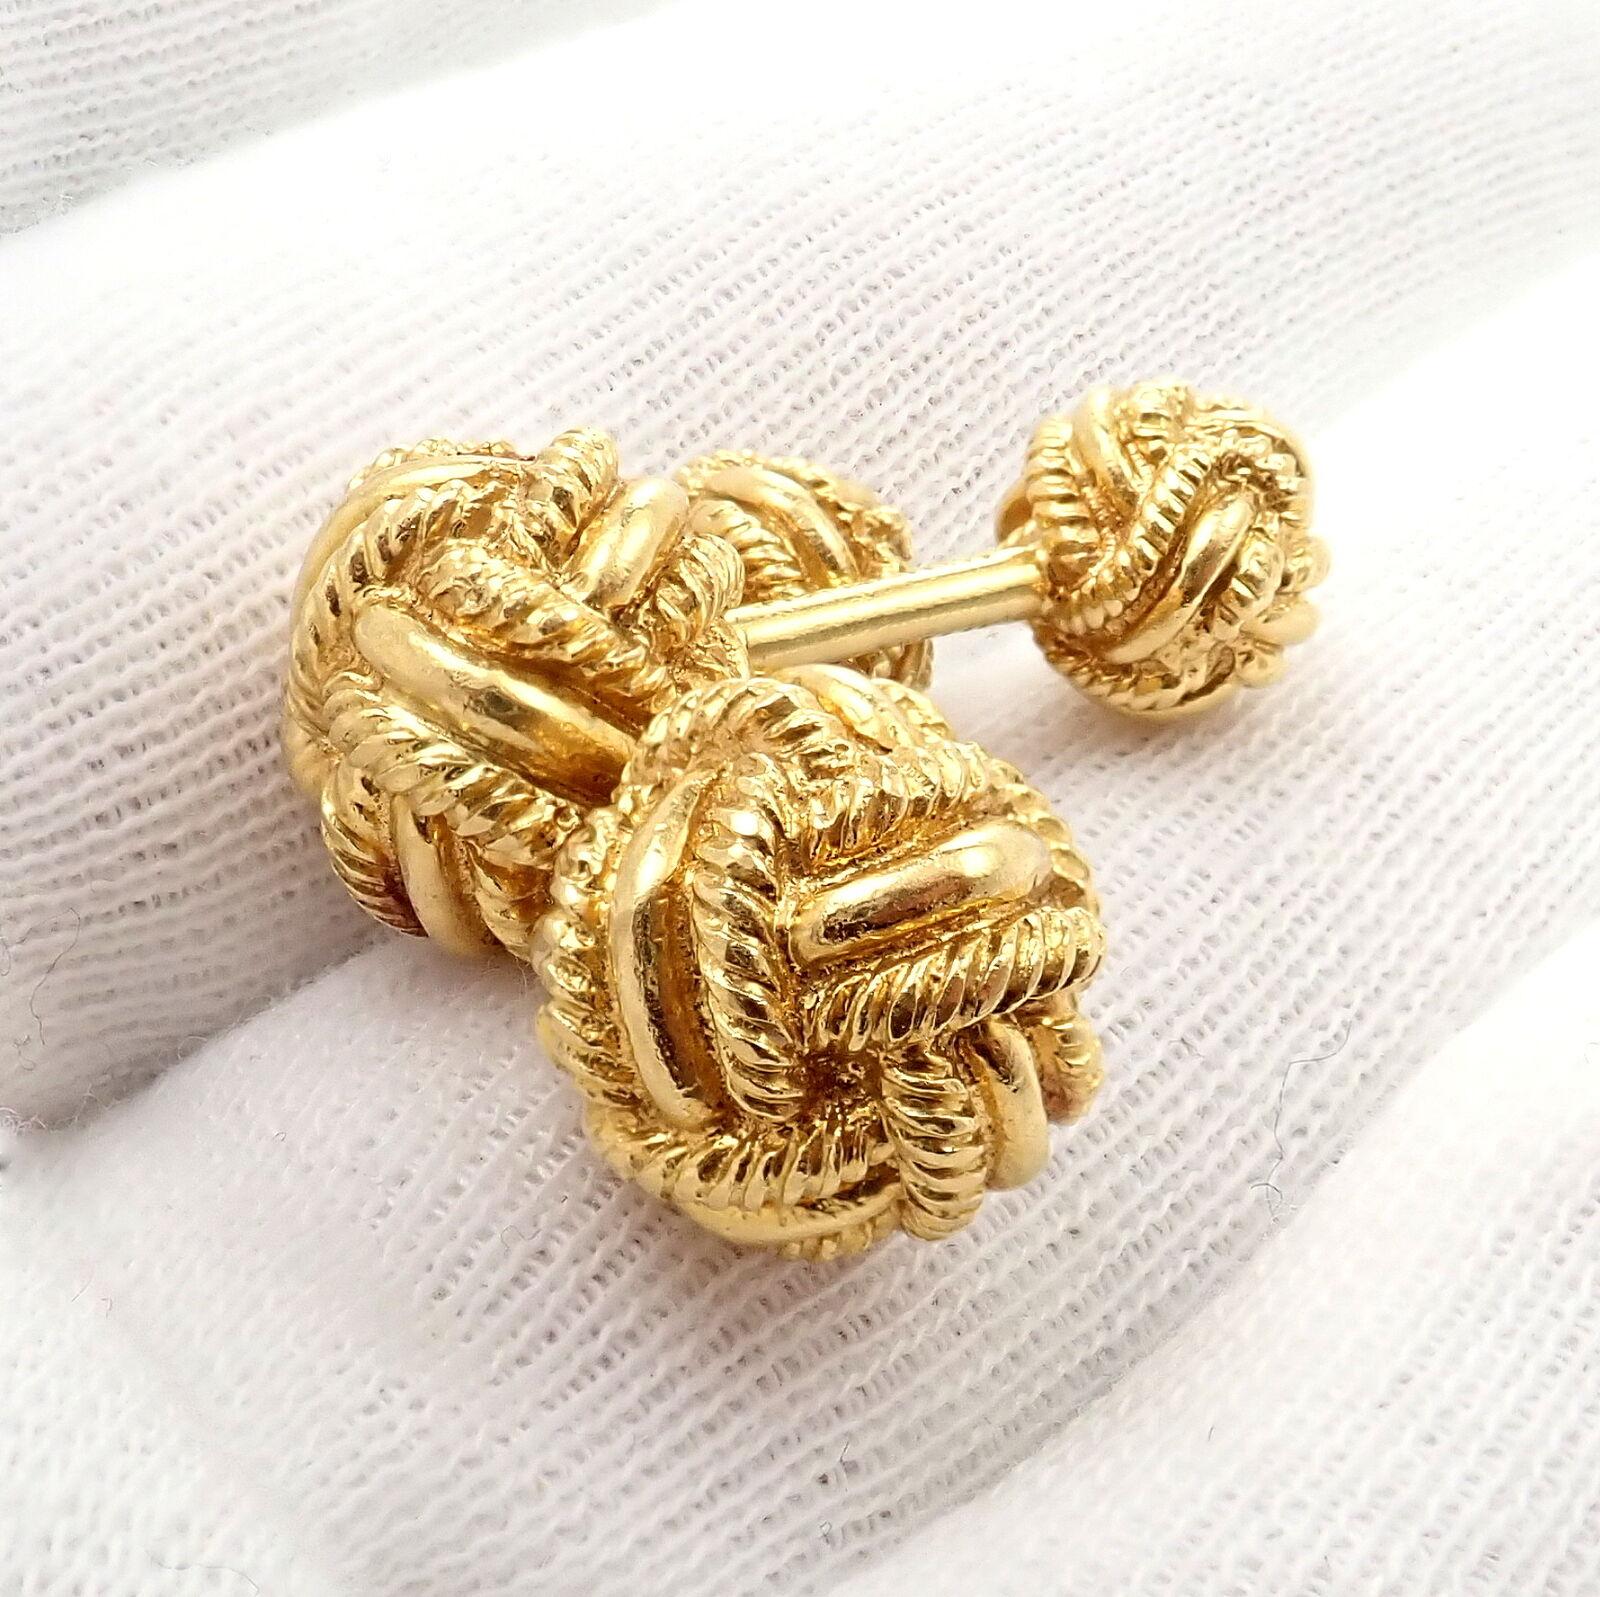 Vintage Tiffany & Co Jean Schlumberger Rope Knot Yellow Gold Cufflinks For Sale 1